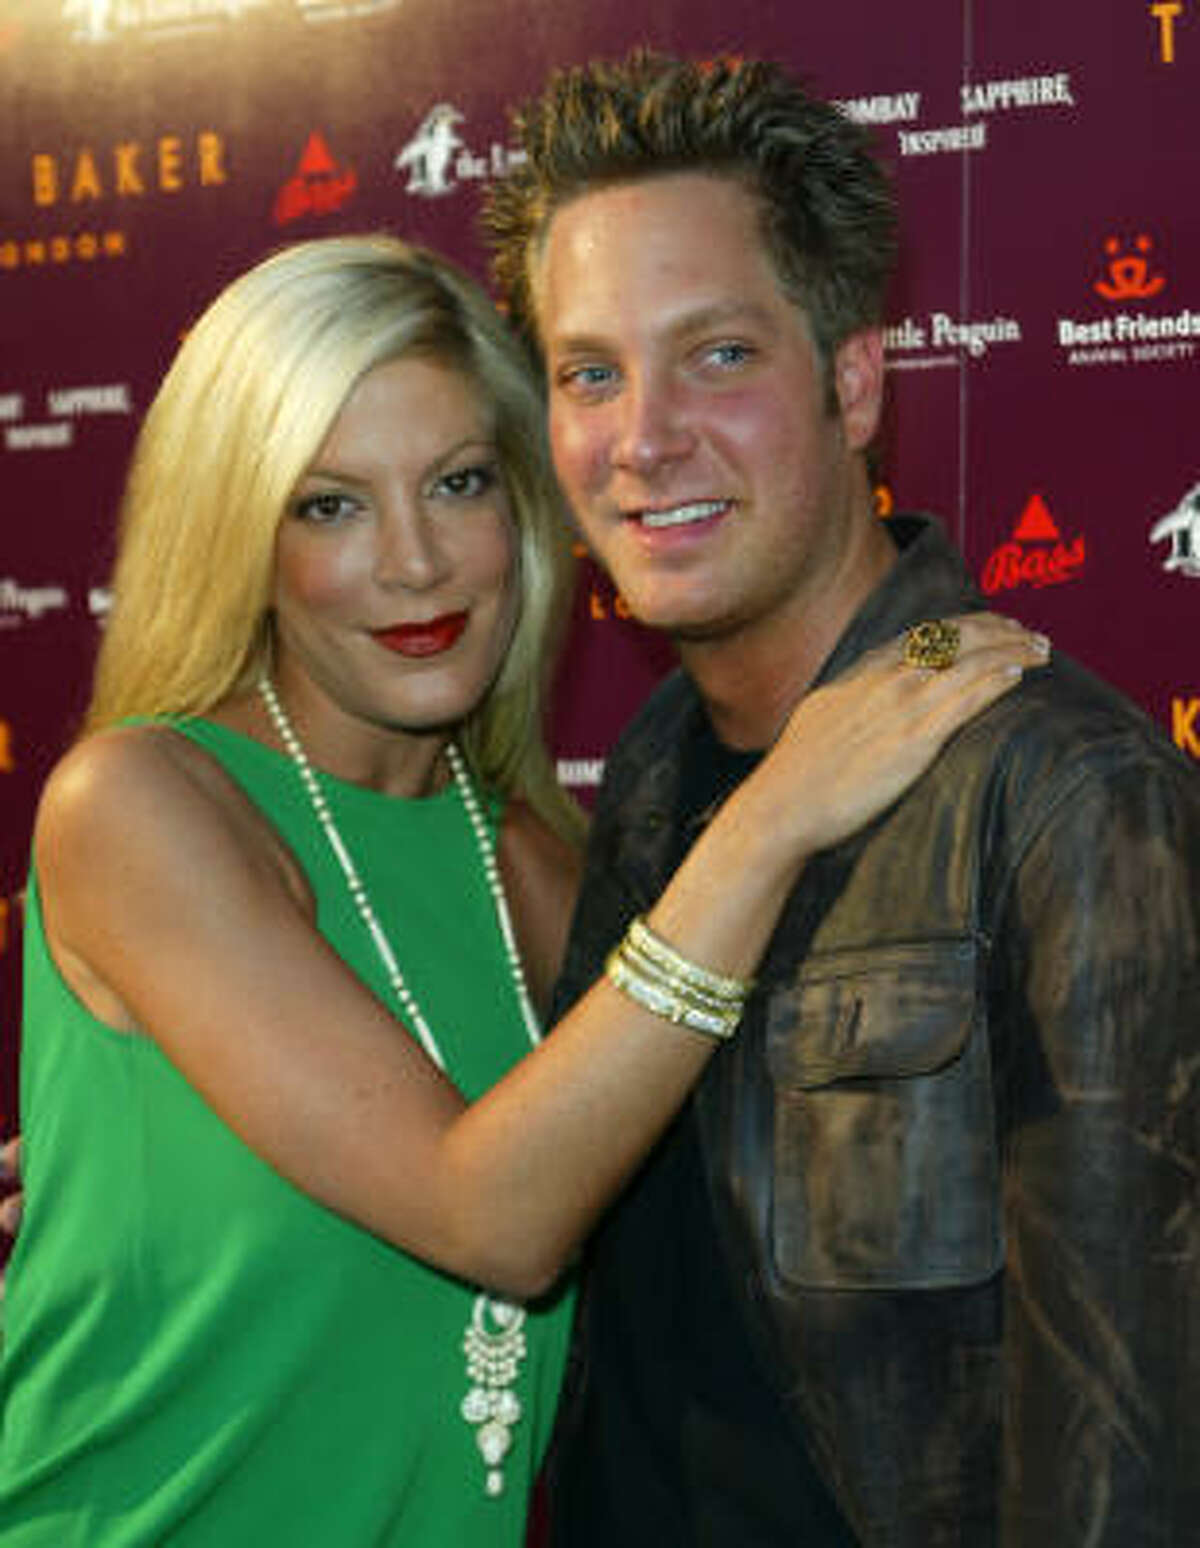 Sister Tori and brother Randy Spelling will appear a few times on the new A&E reality show, Sons of Hollywood.